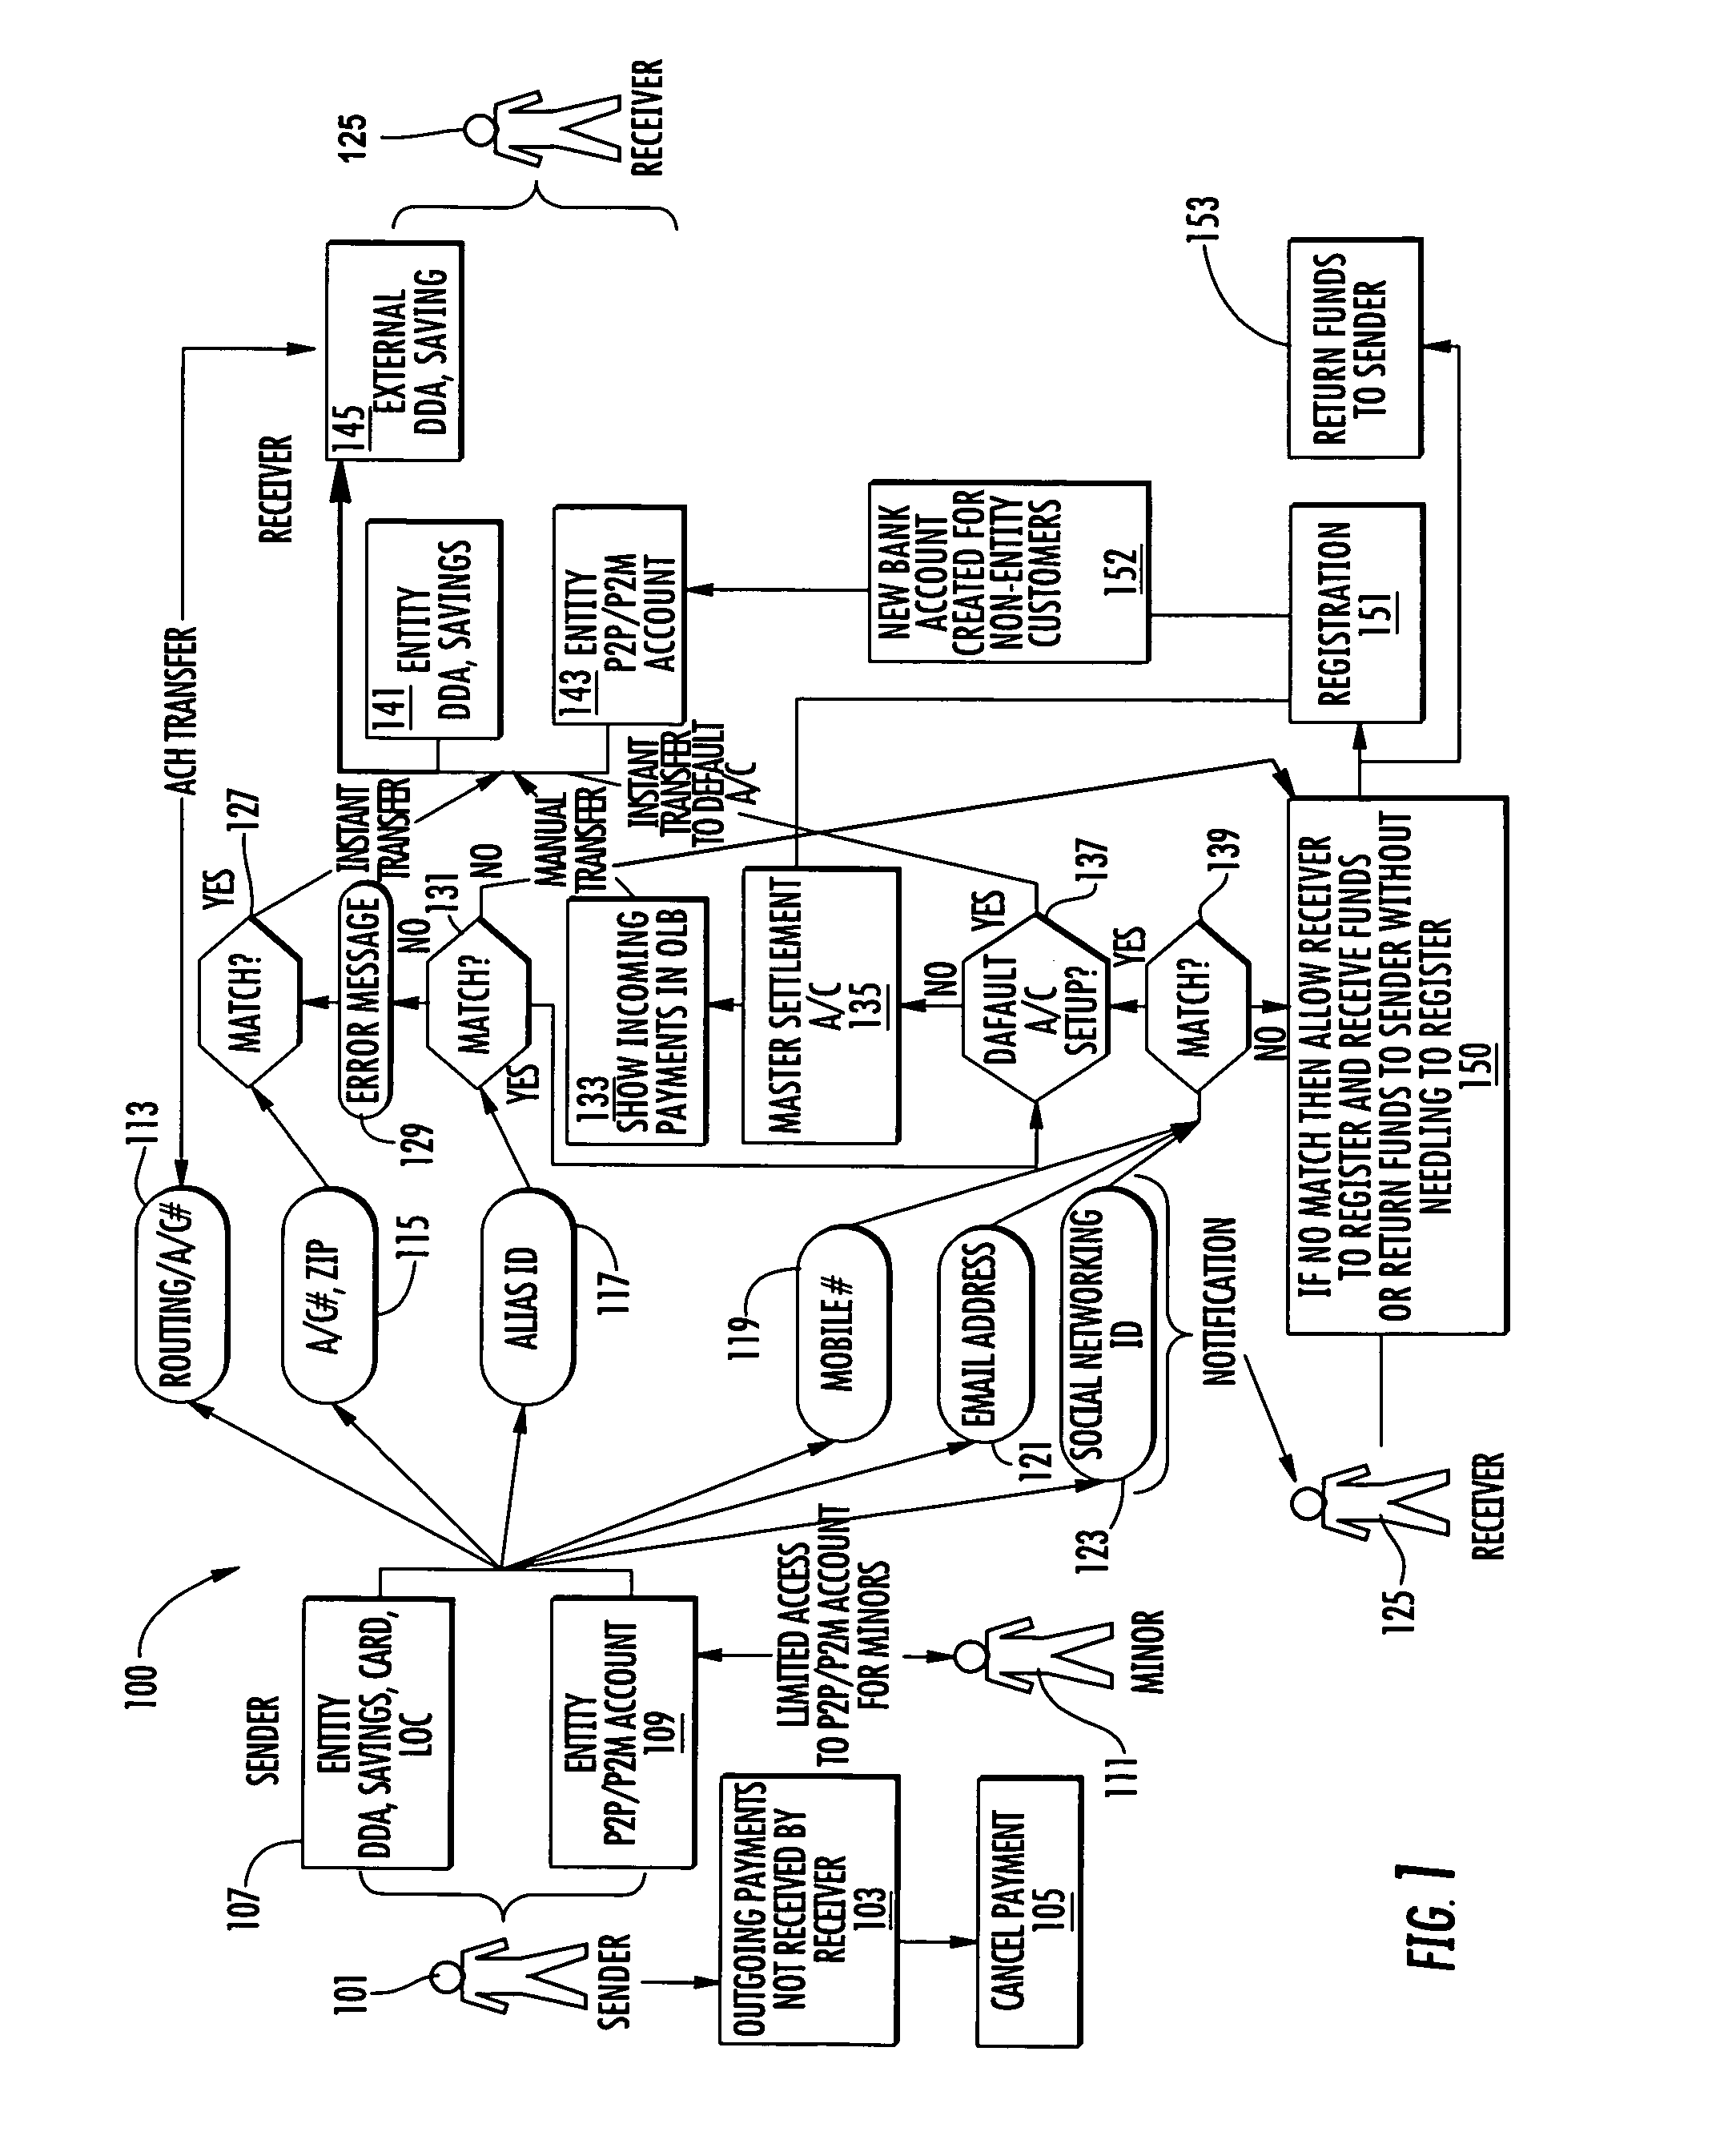 Mobile payment system and method